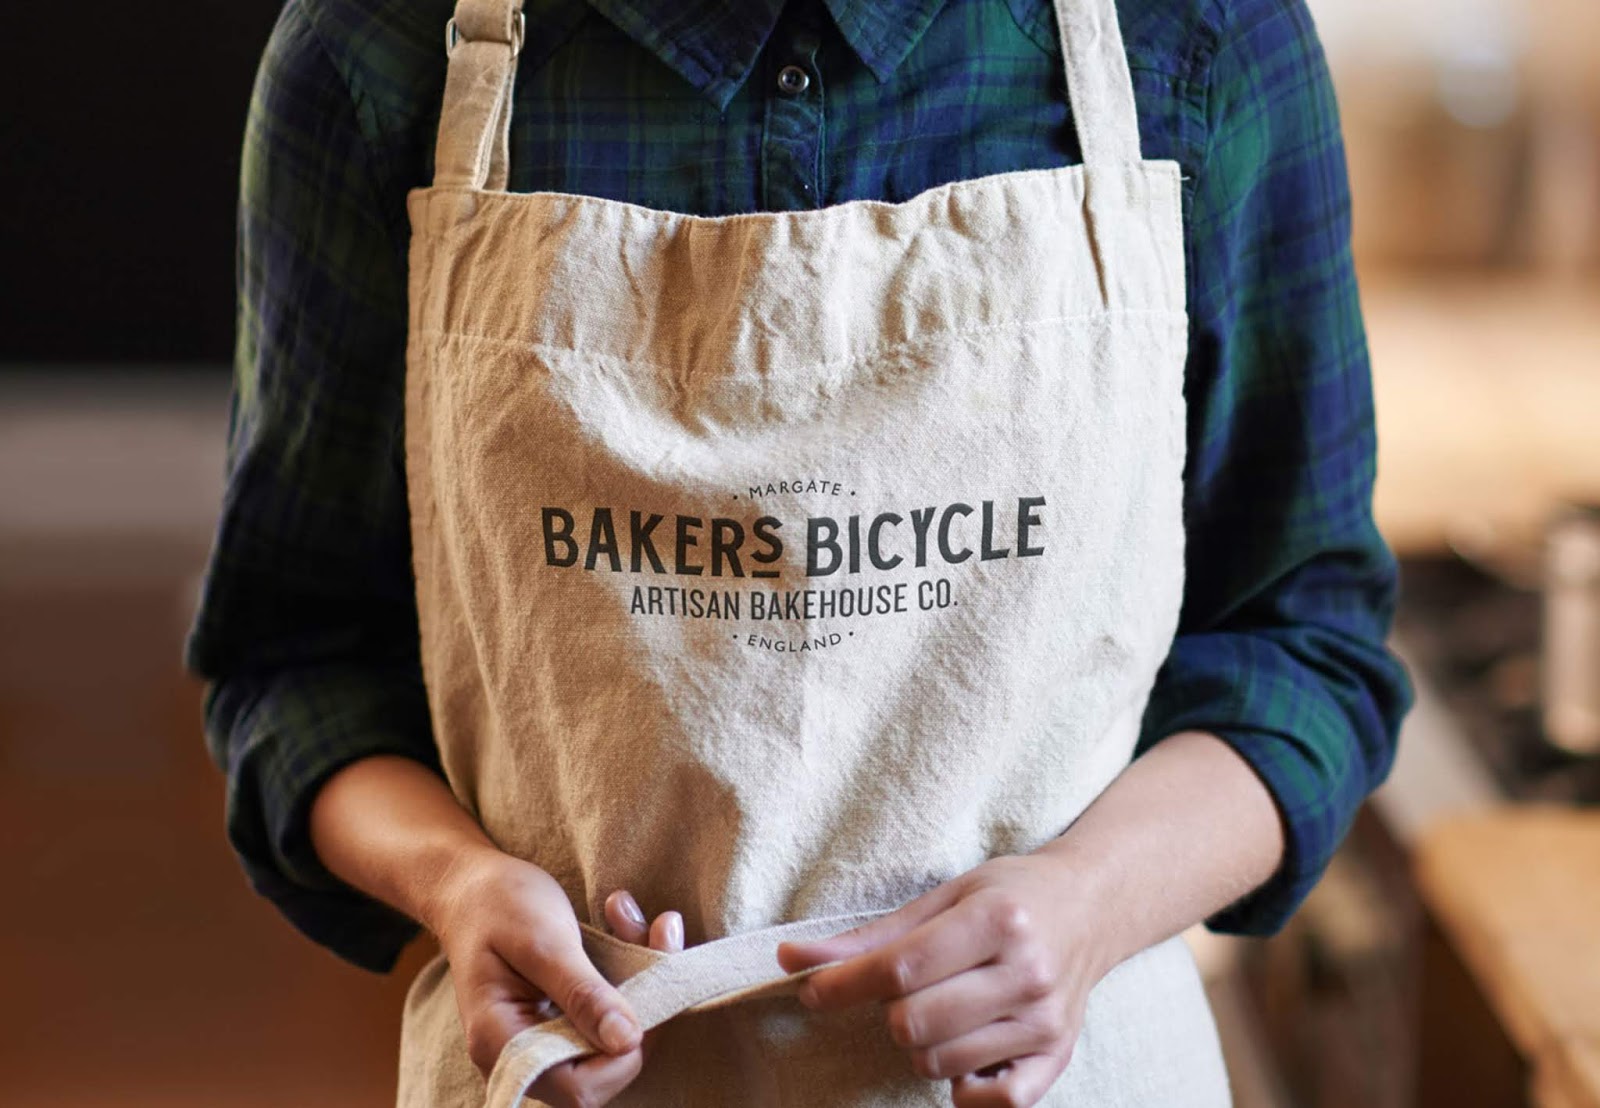 Bakers Bicycle面包店品牌包装设计